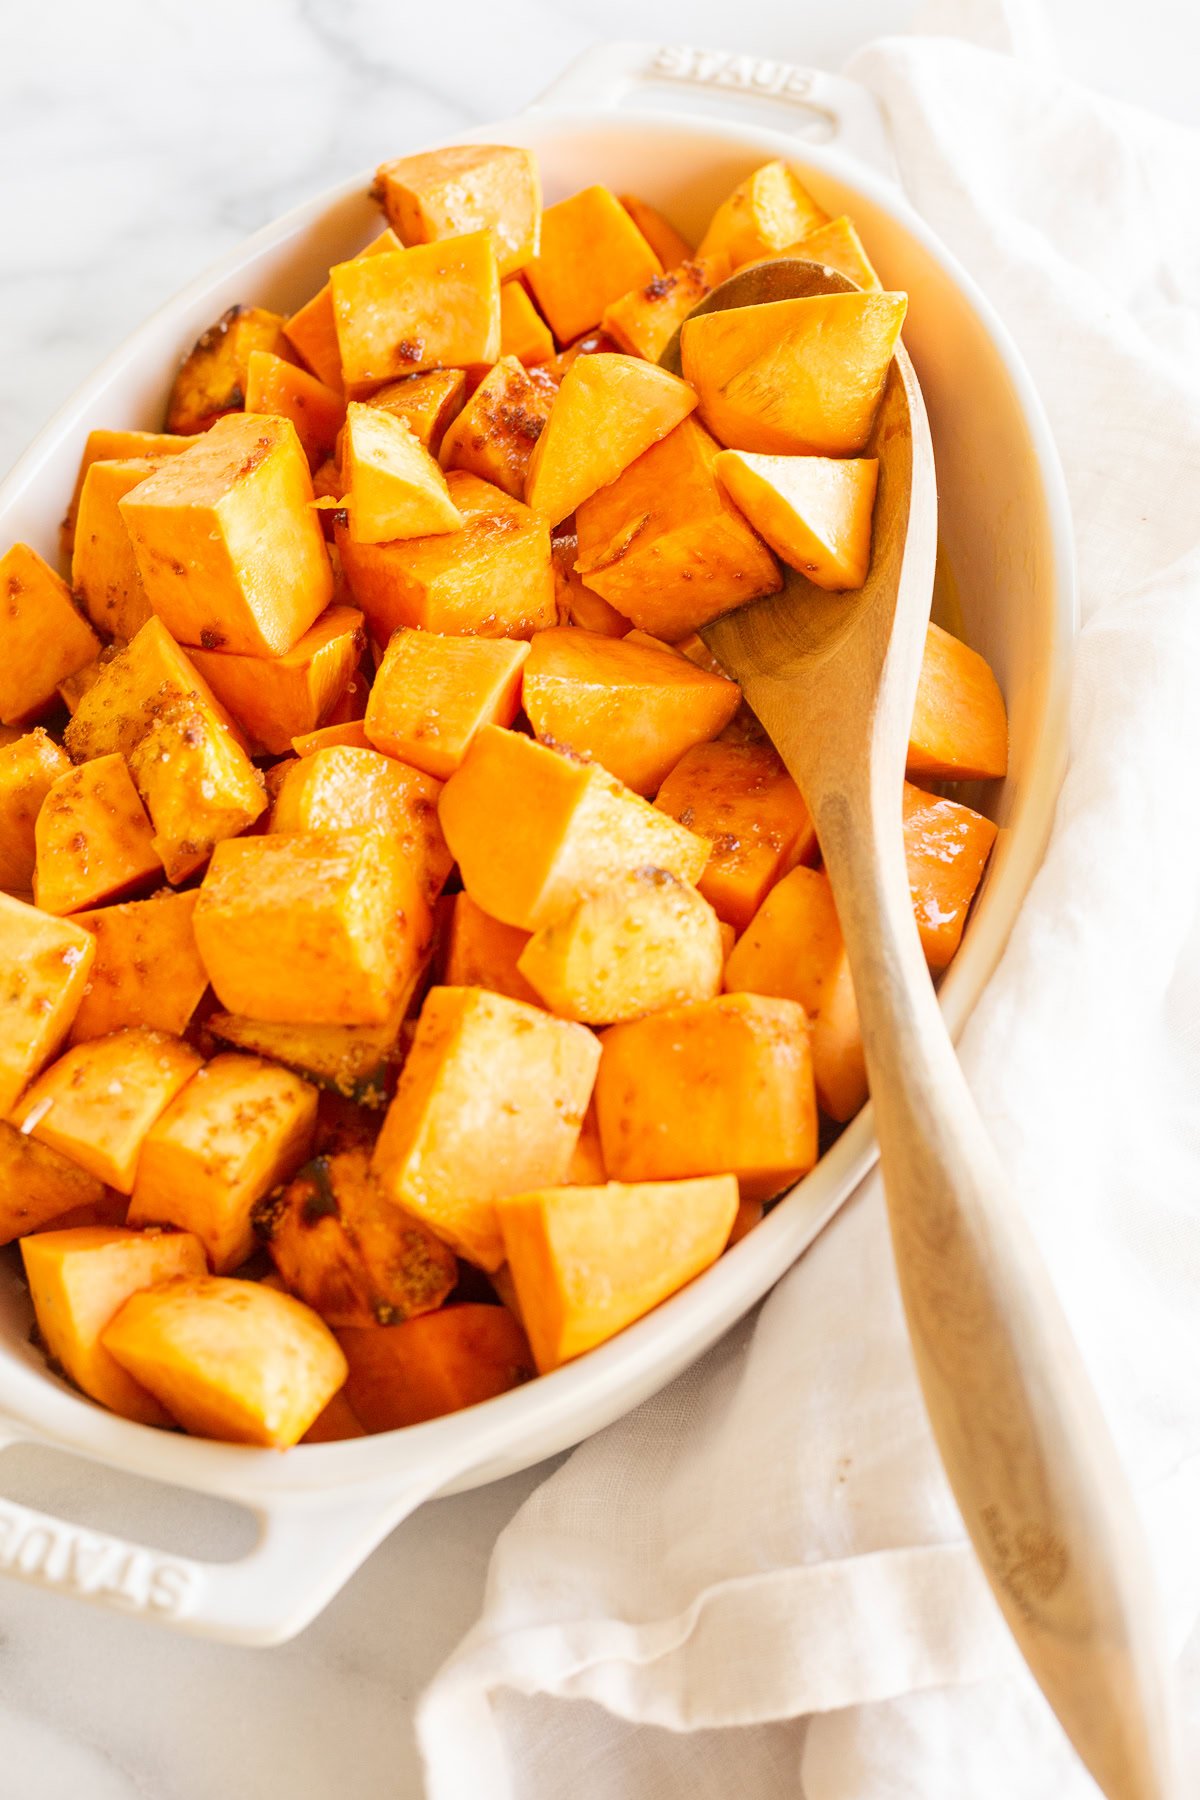 A white dish filled with cubed sweet potatoes, a delicious option for healthy steak sides, accompanied by a wooden spoon.